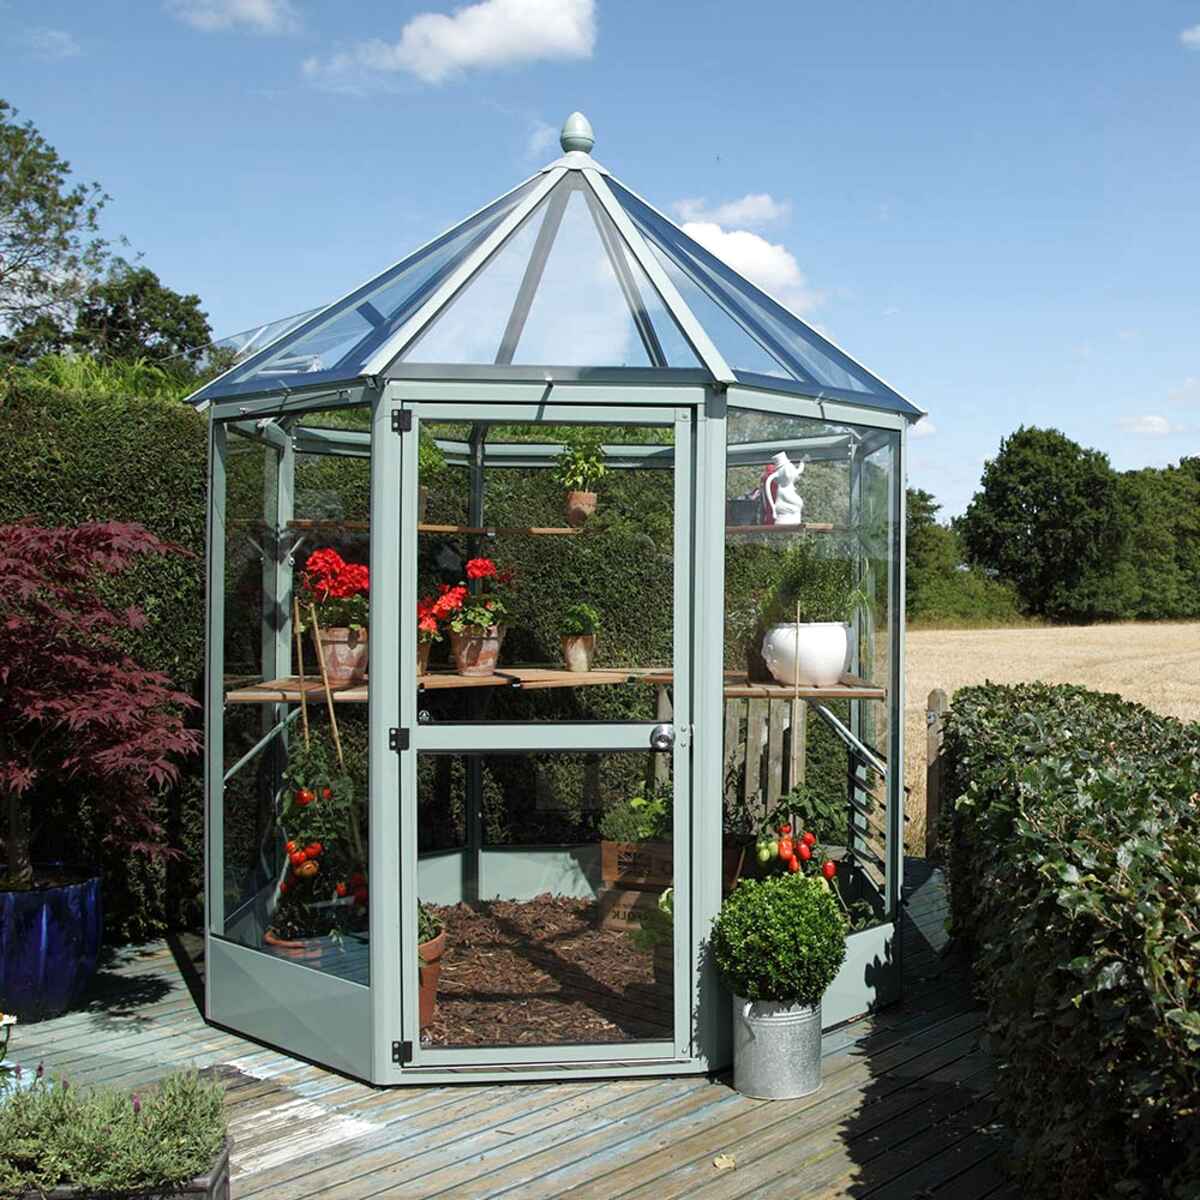 Octagonal Greenhouse  for sale  in UK View 25 bargains